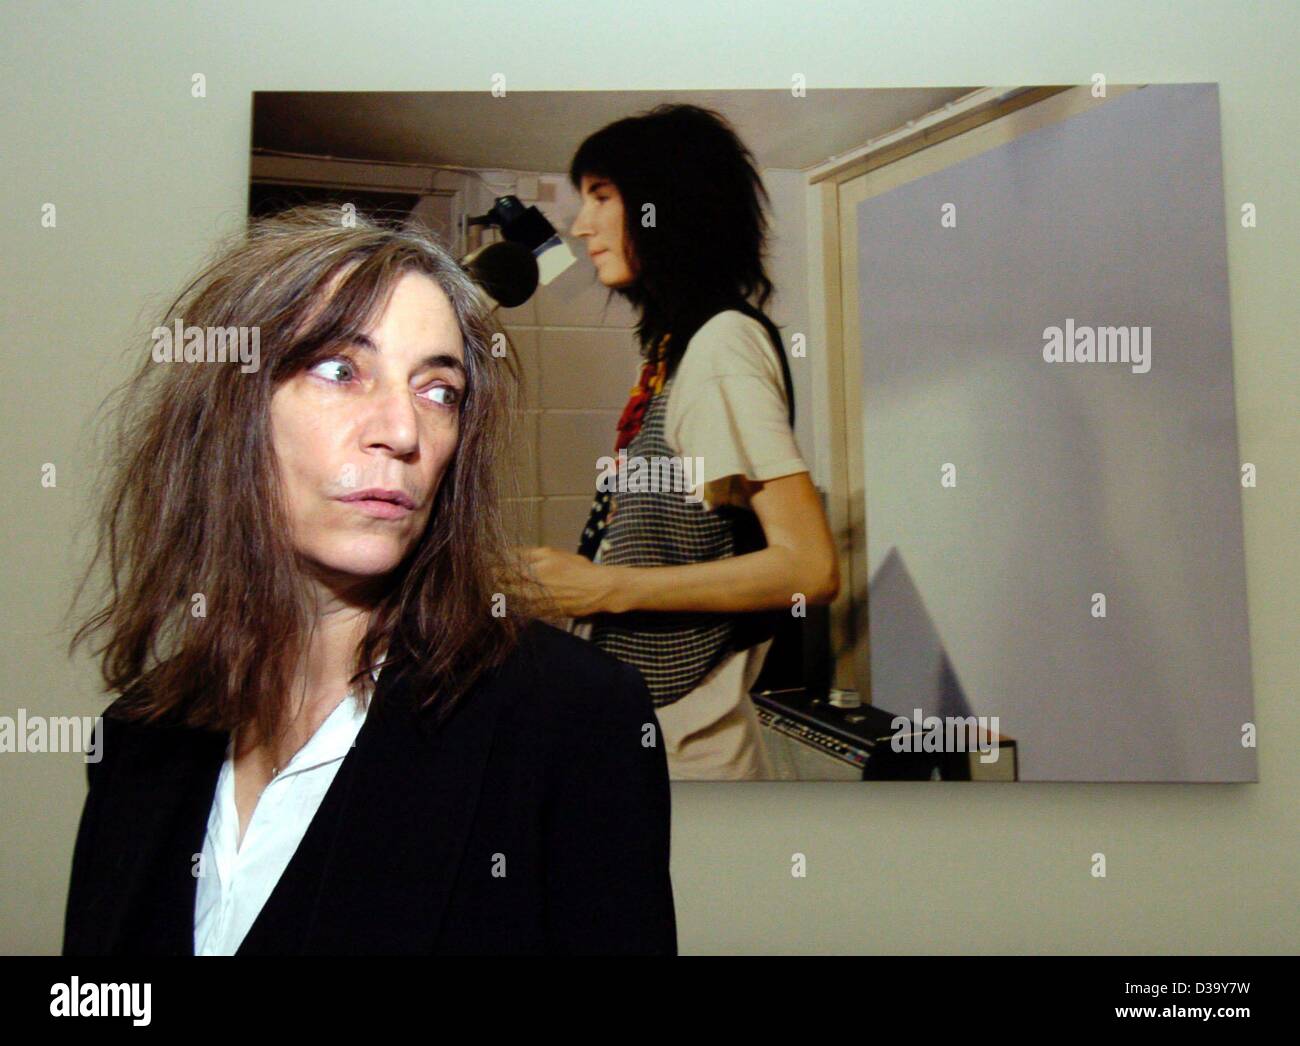 (dpa) - US rock star Patti Smith stands in front of the painting 'Patti Smith III' by Swiss artist Franz Gertsch during a visit of the Pinakothek der Moderne museum in Munich, 18 December 2003. The photorealistic painting dates from 1978 and shows Patti Smith at work in the studio. Stock Photo